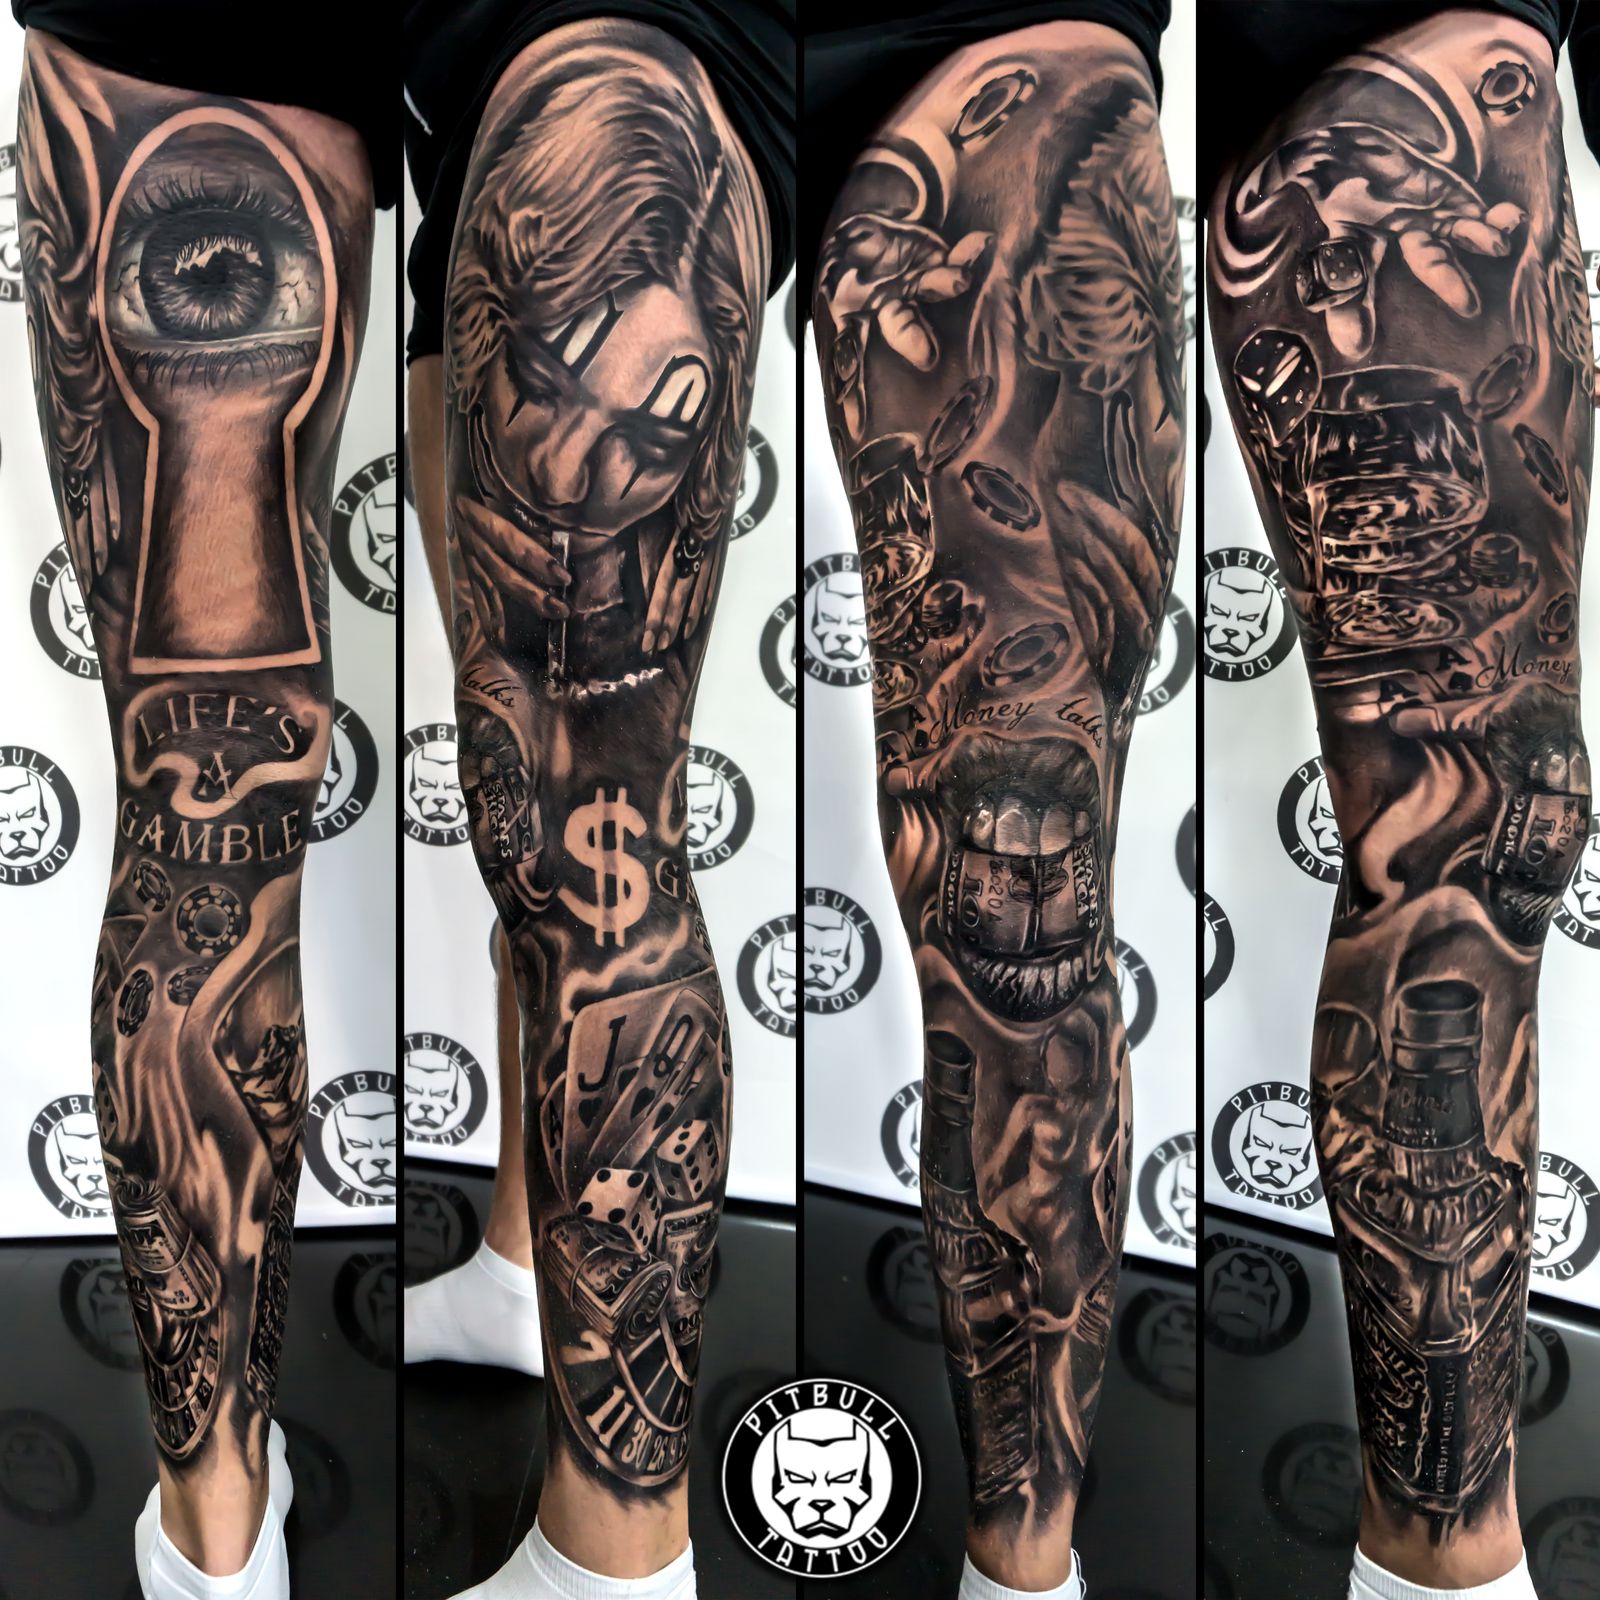 Killer Ink Tattoo on Twitter Amazing healed black and grey sleeve by  Ruben Langsted with killerinktattoo supplies killerink tattoo tattoos  bodyart ink tattooartist tattooink tattooart blackandgrey  blackandgreytattoo tattoosleeve 